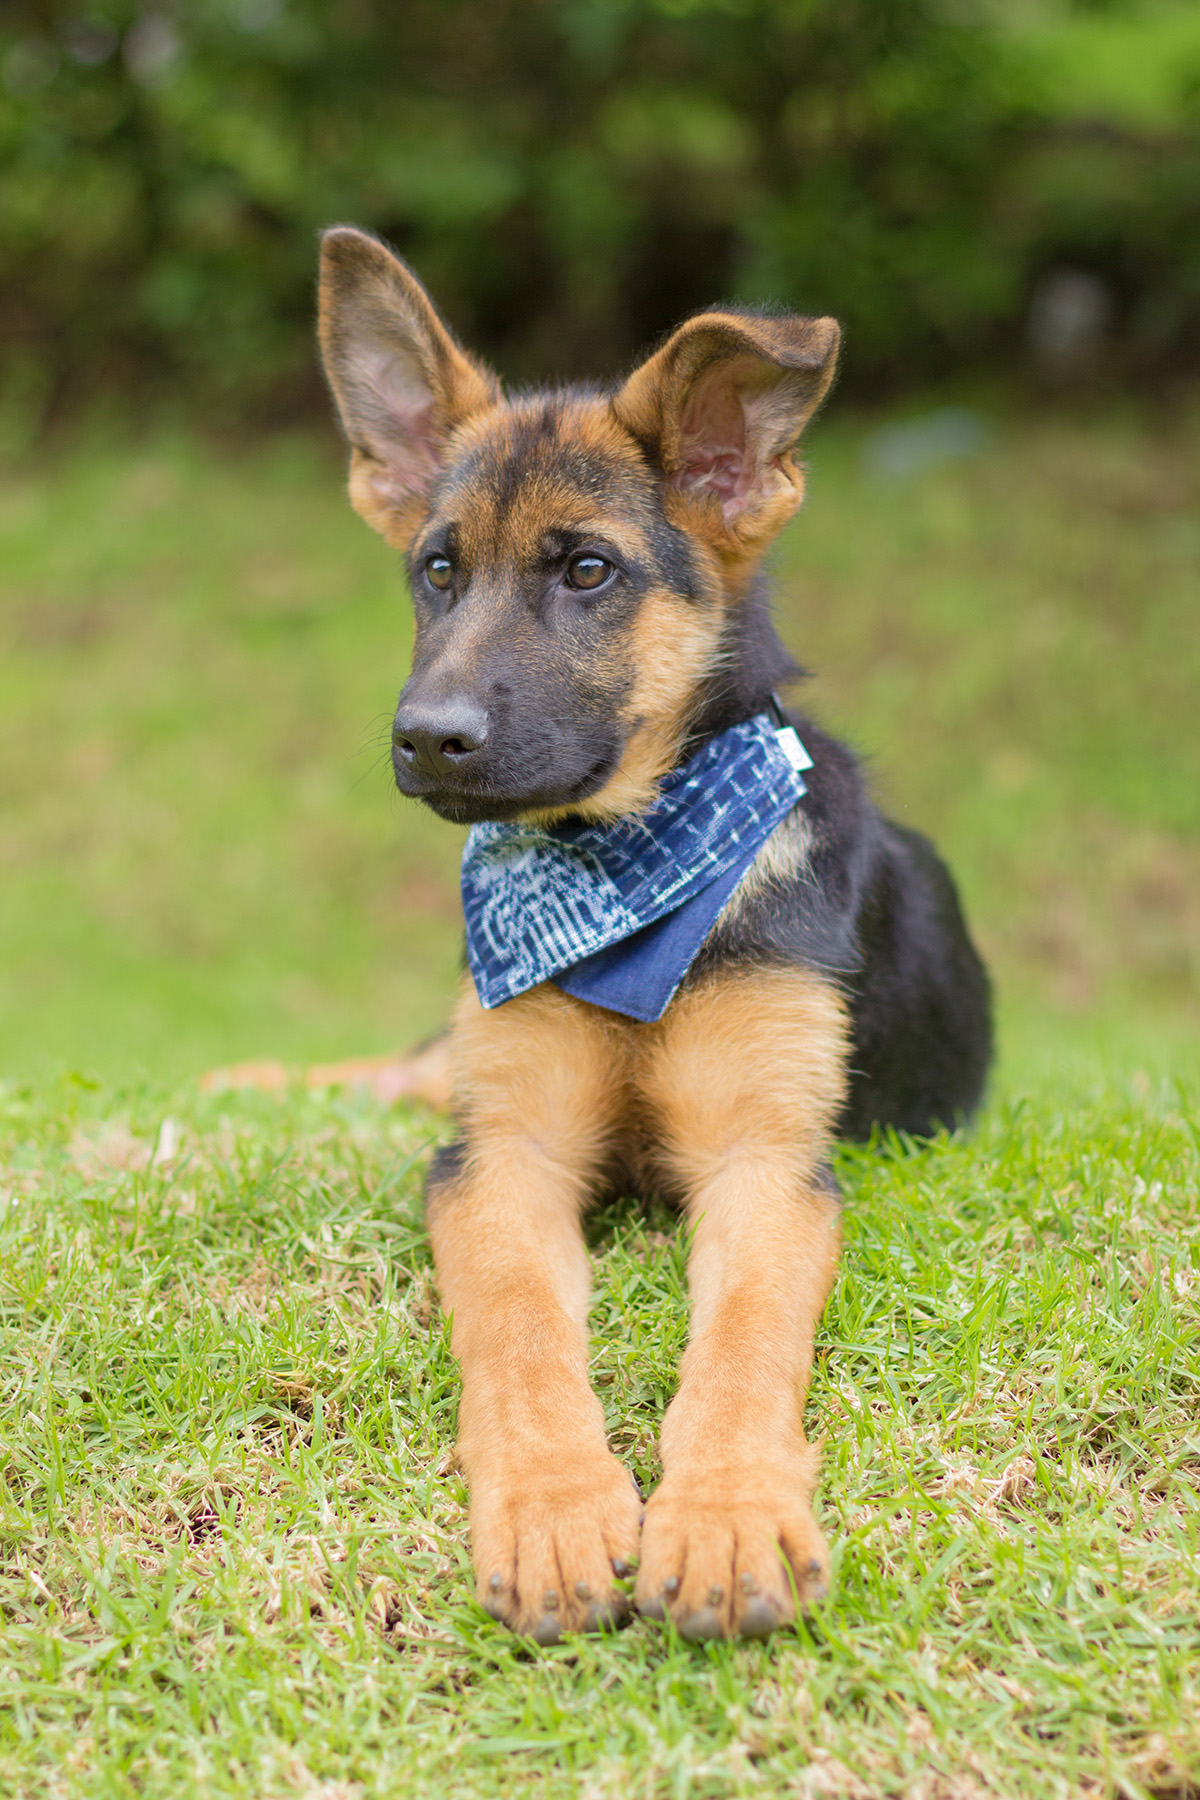 Looking for a stylish gift for a dog-loving friends? Jazal Color makes stunning dog bandanas from handwoven Guatemalan textiles. Learn more about this great company and their incredible products!